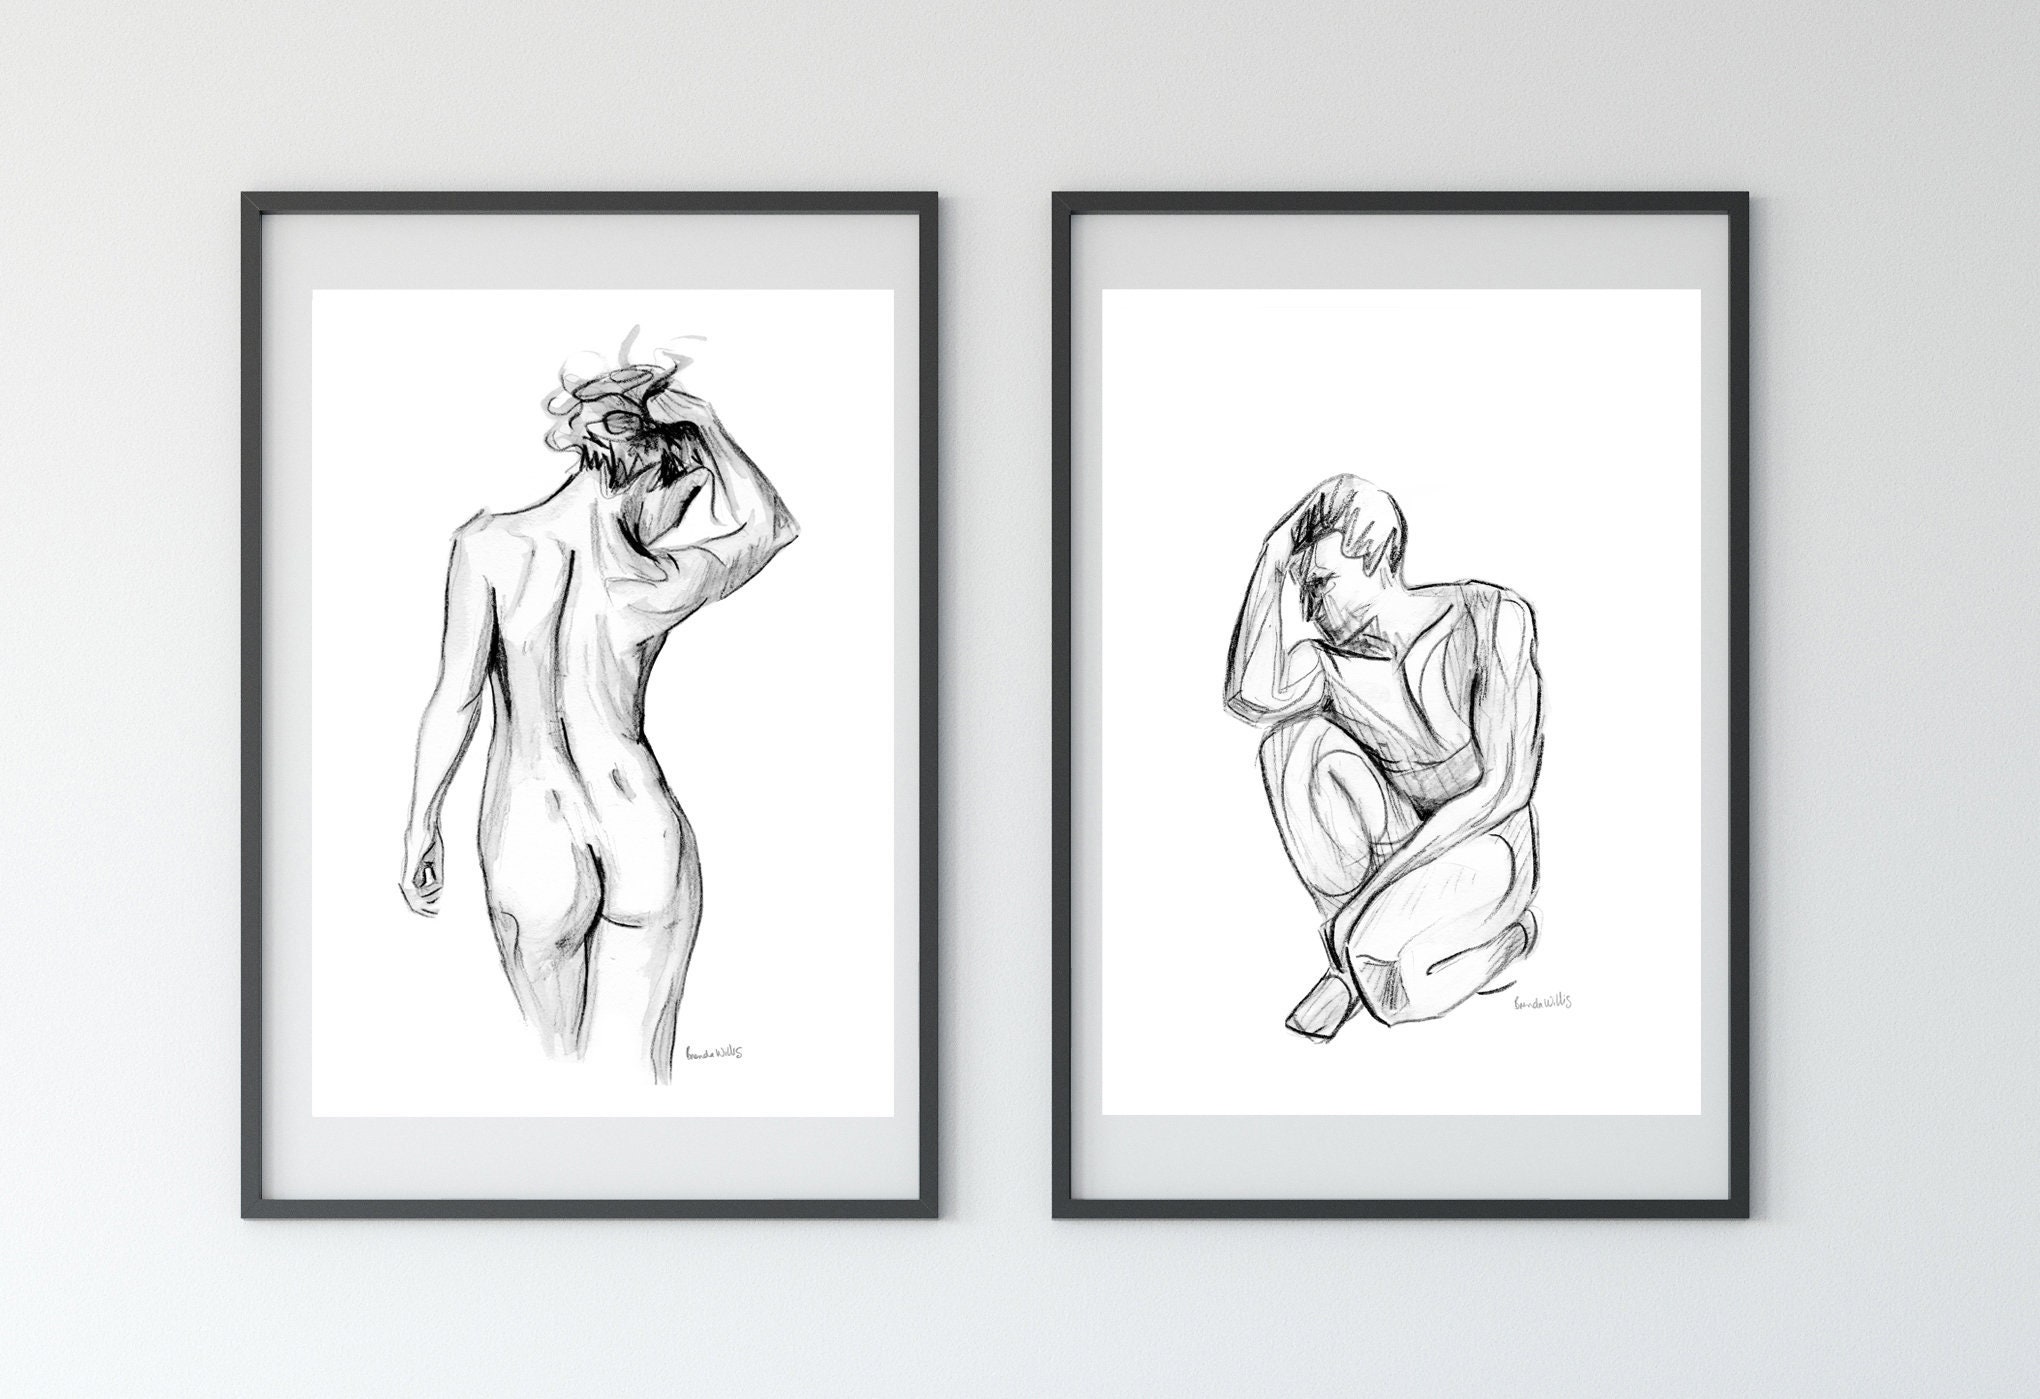 Hot girl Pencil drawings - A4 size - Black and White